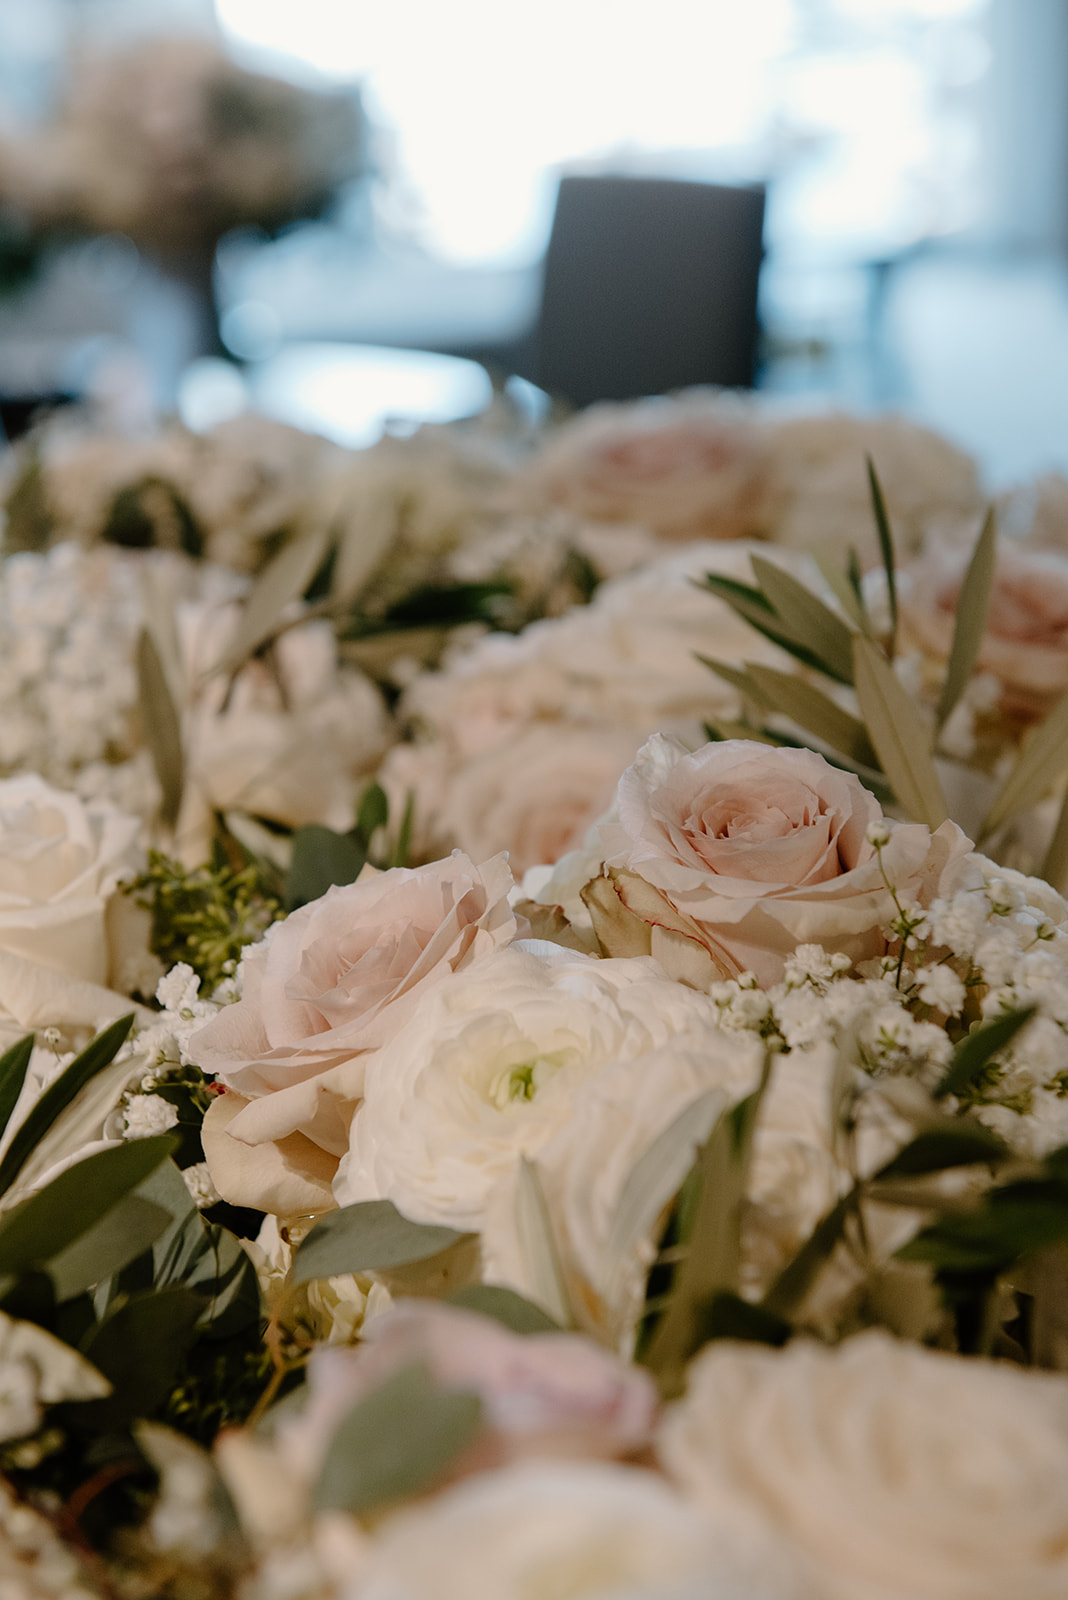 Lake Effect Florals Design Studio (by appointment only)